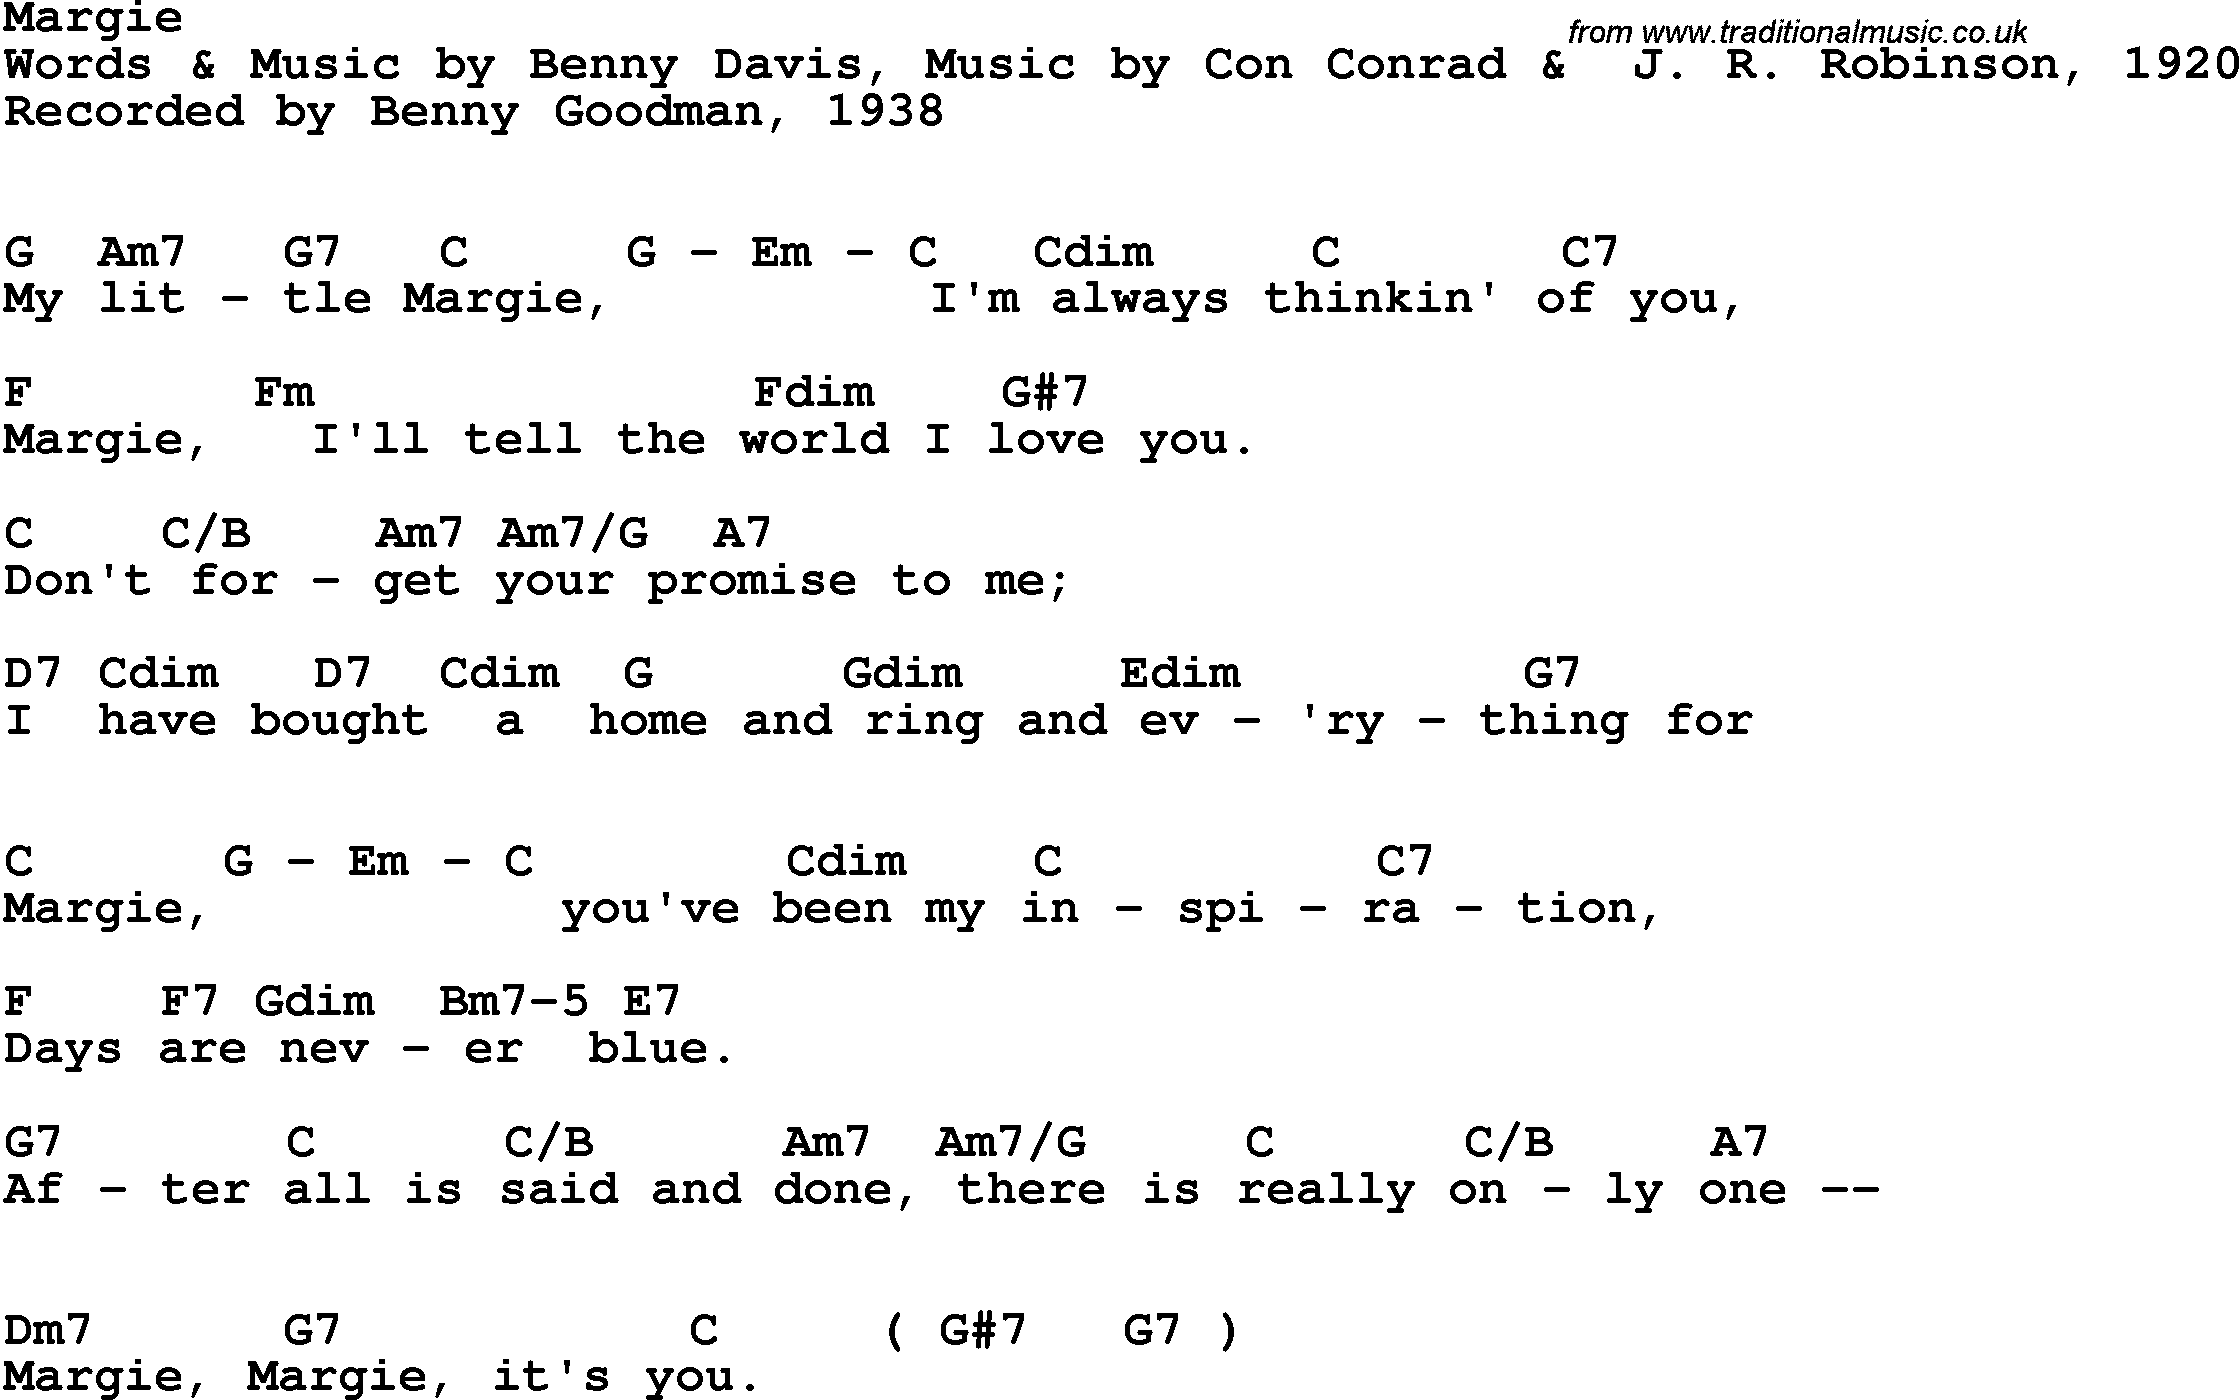 Song Lyrics with guitar chords for Margie - Benny Goodman, 1938